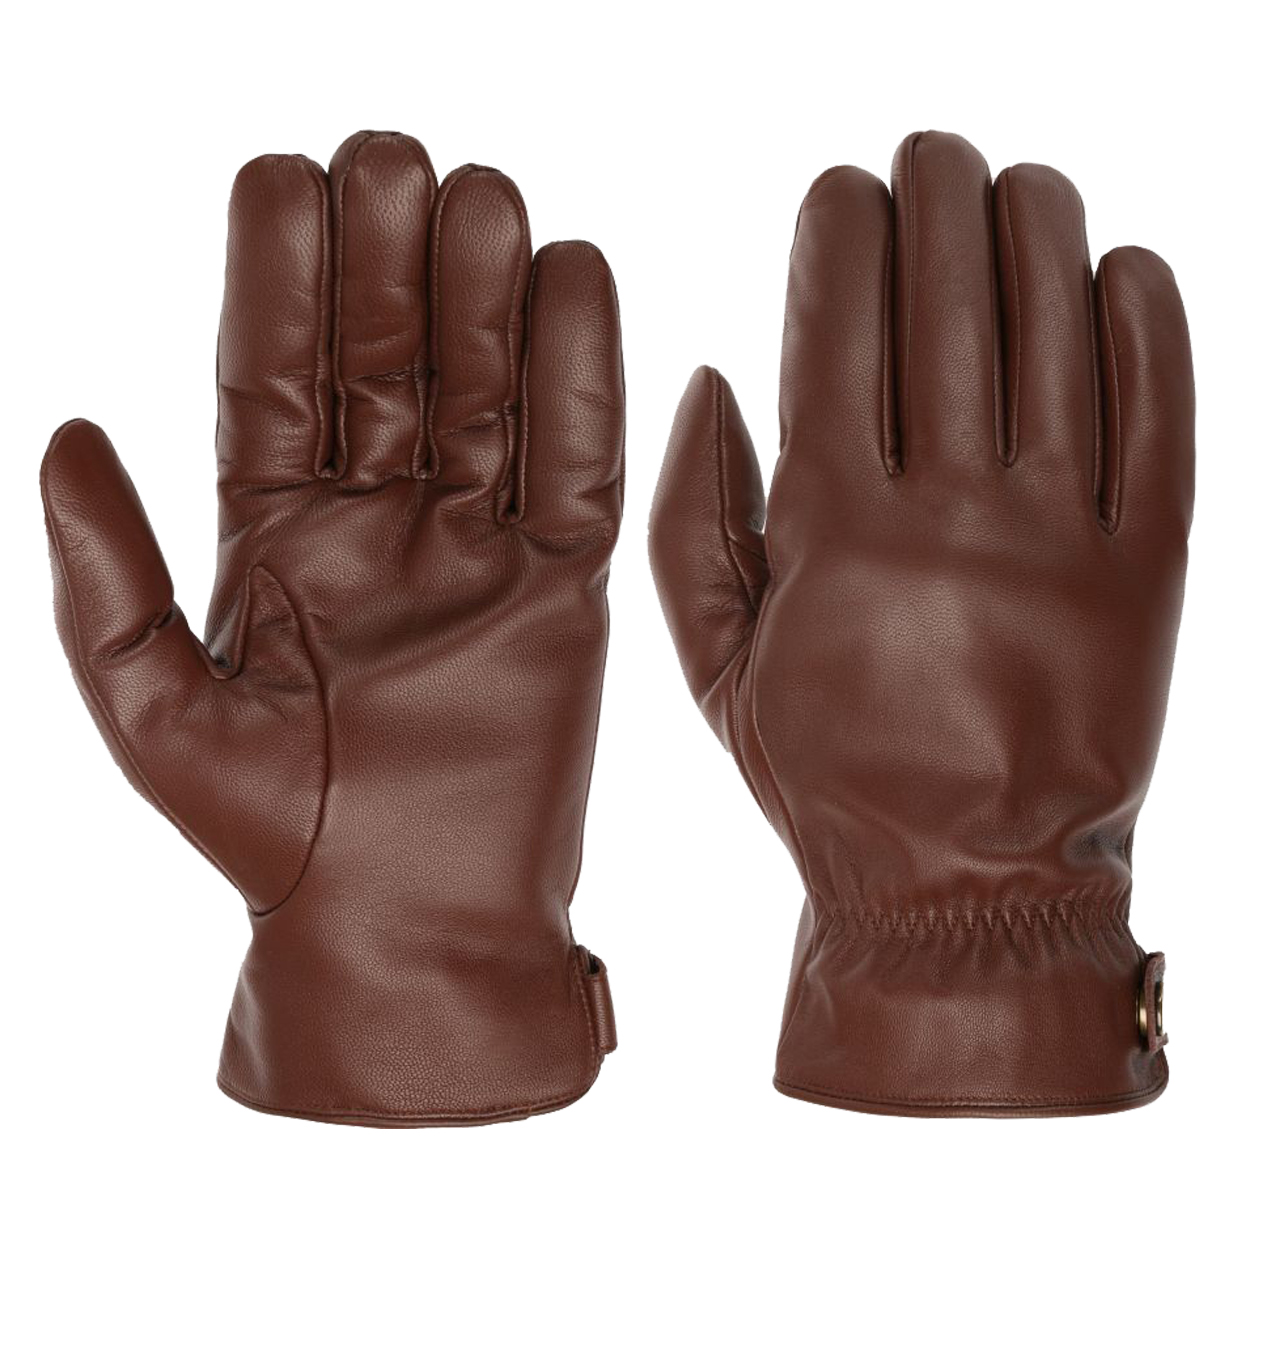 Stetson - Conductive Leather Gloves - Brown